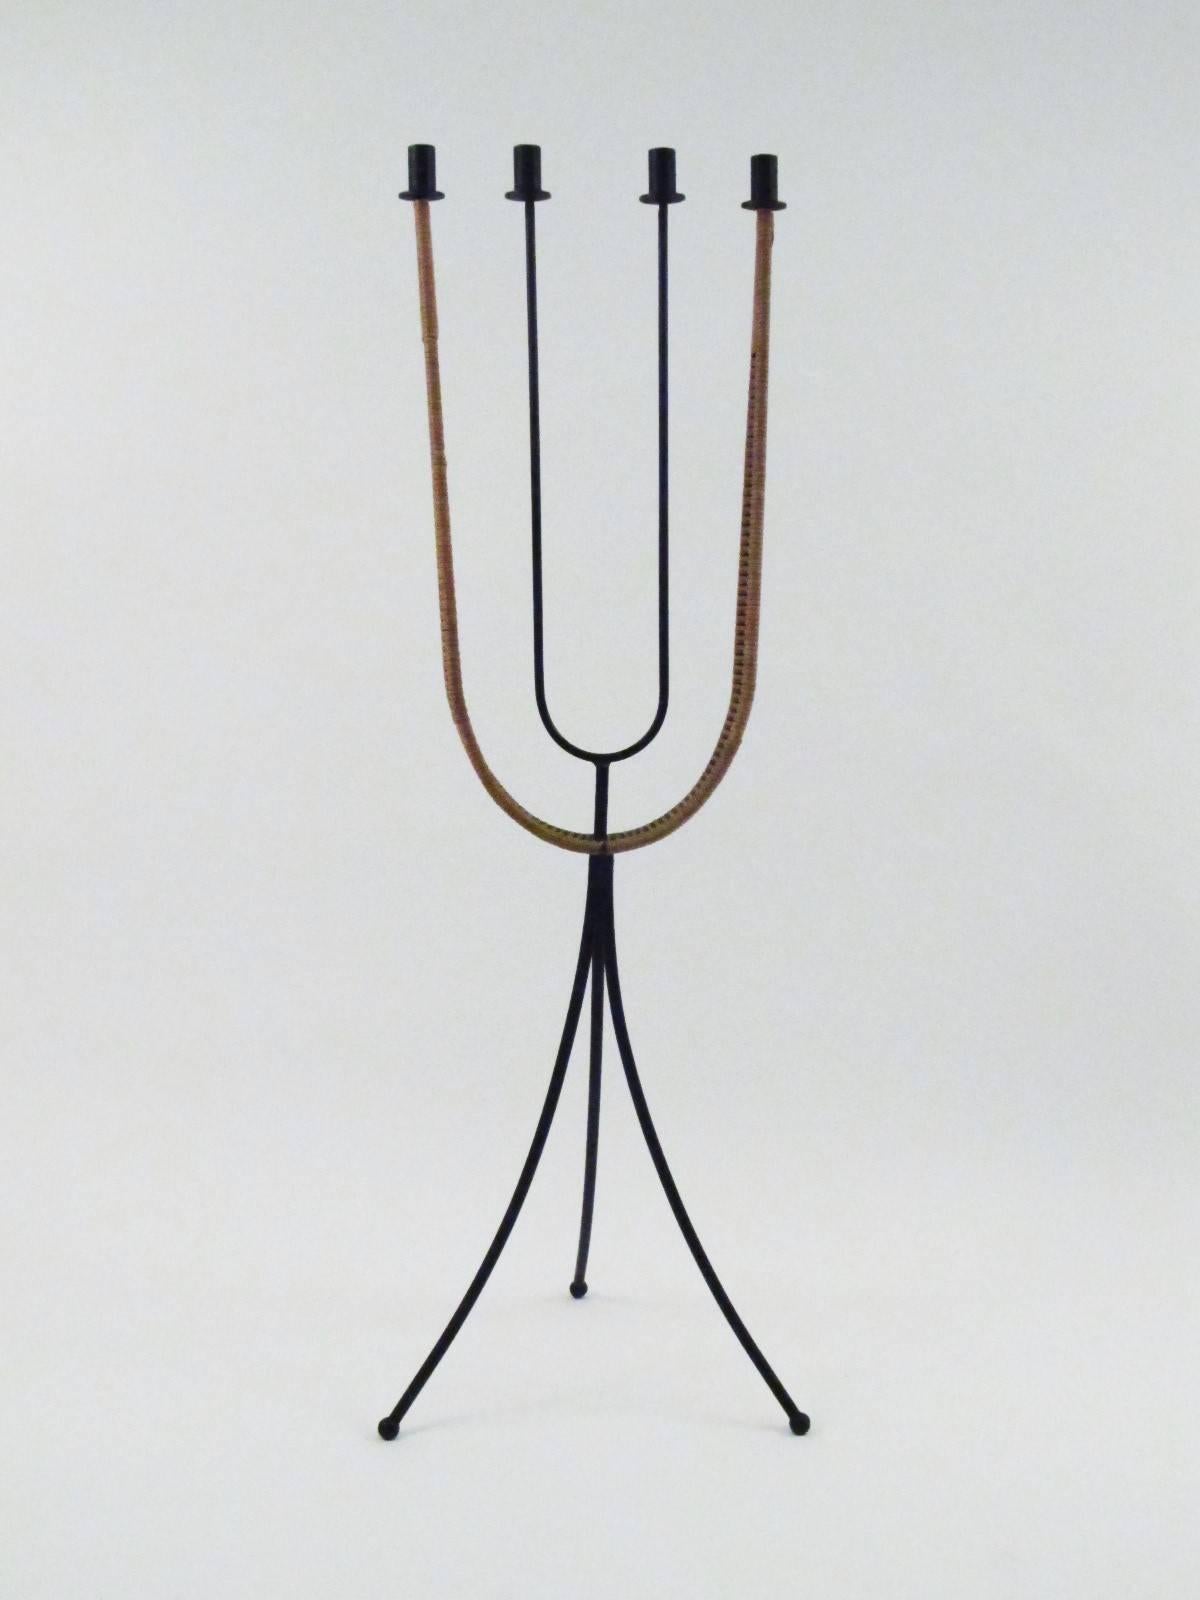 I find this to be one of Arthur Umanoff's most elegant designs. Big dramatic shapes and curves and the wonderful contrast of the hard black lines of iron with the organic delicacy of the wicker rapping.

Three plastic ball feet.